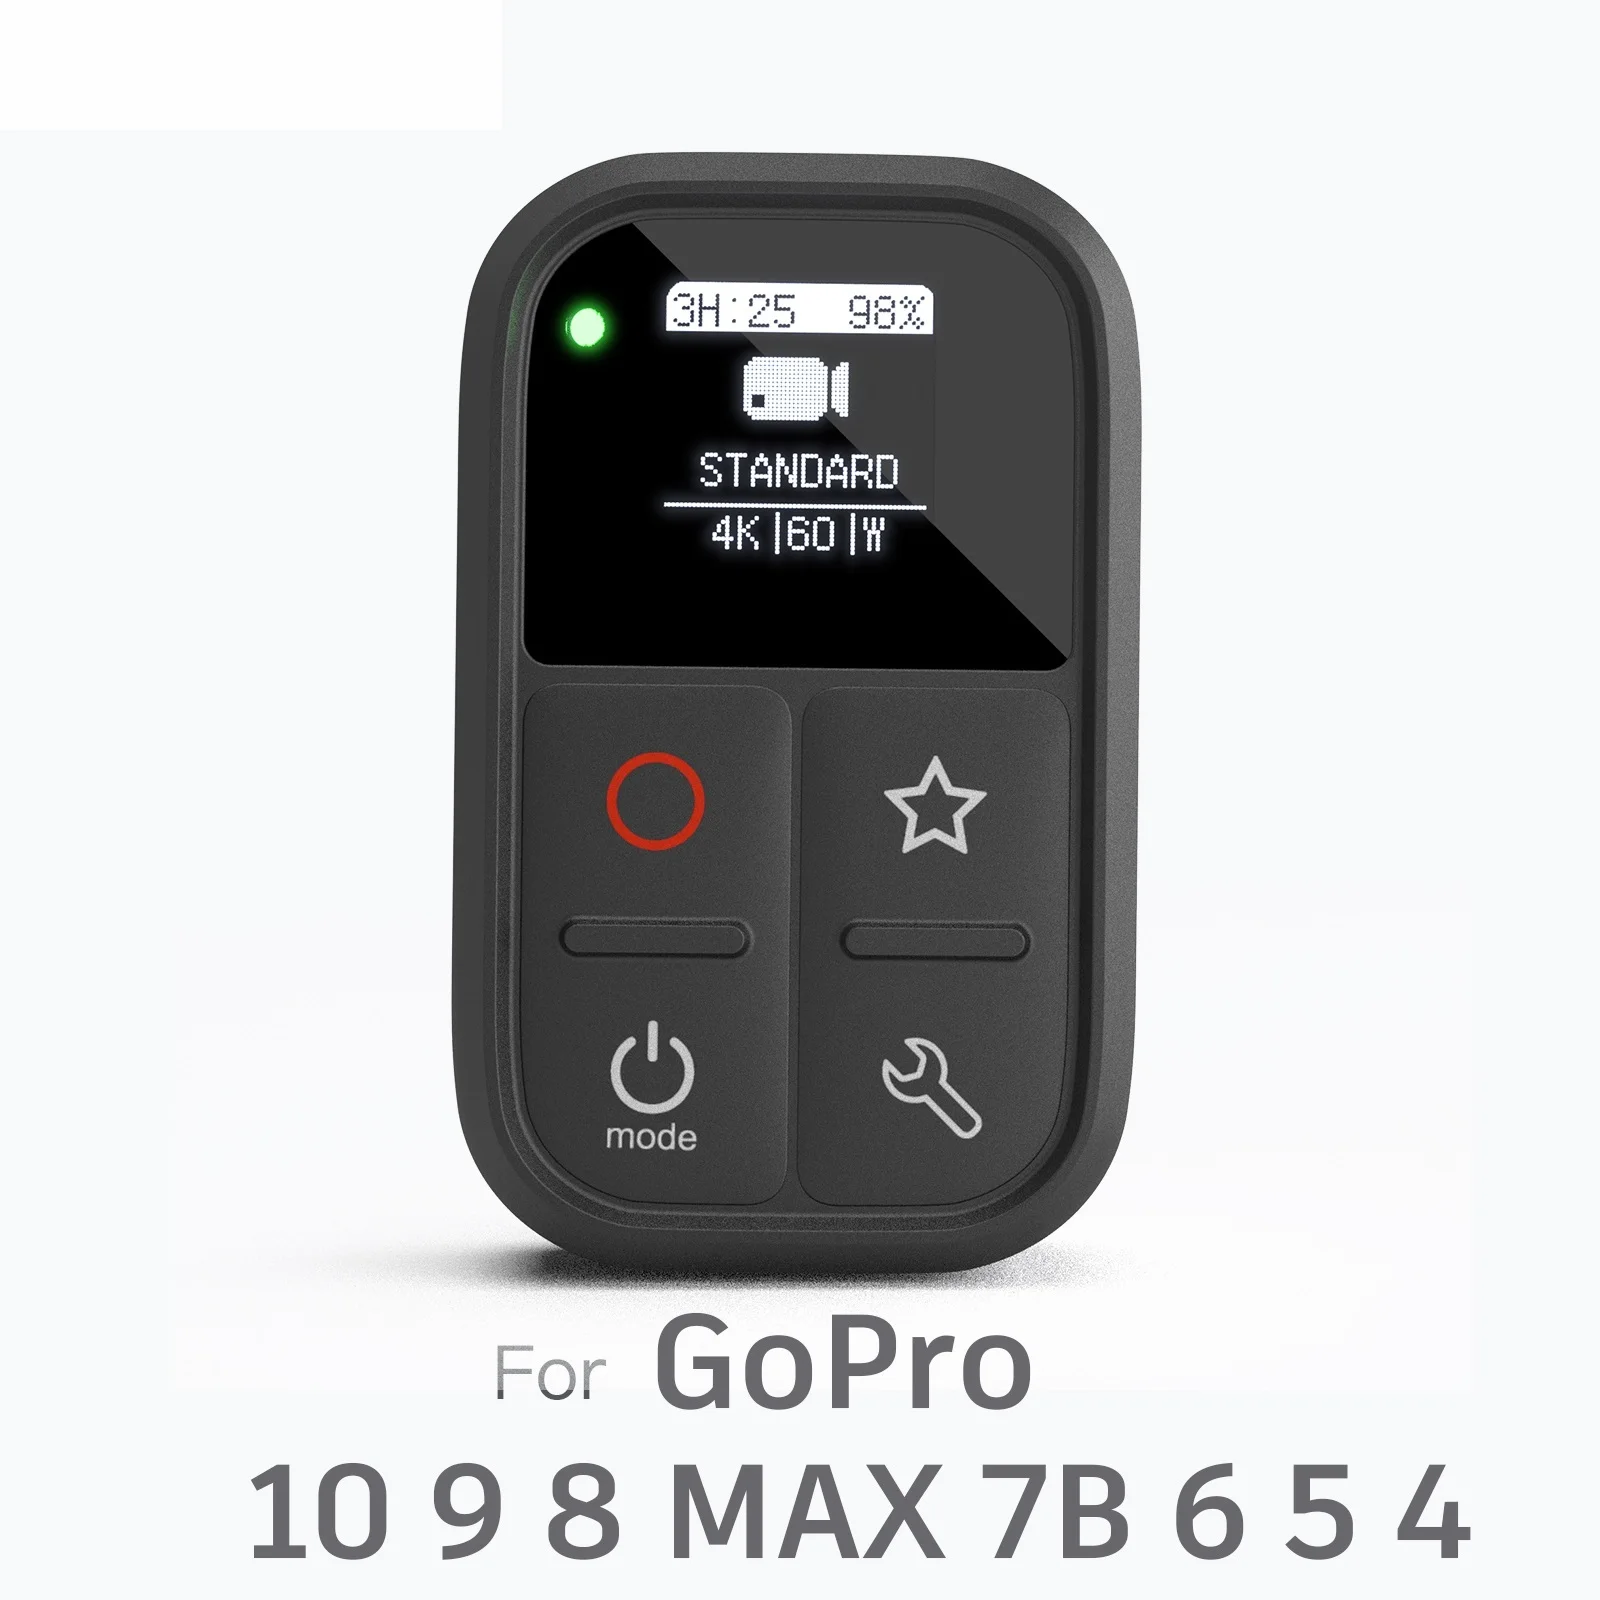 

New. OLED SCREEN Remote Control for GoPro 10 9 8 Max 7B 6 5 with Stick Mount and Wrist Waterproof Gopro10 Remote